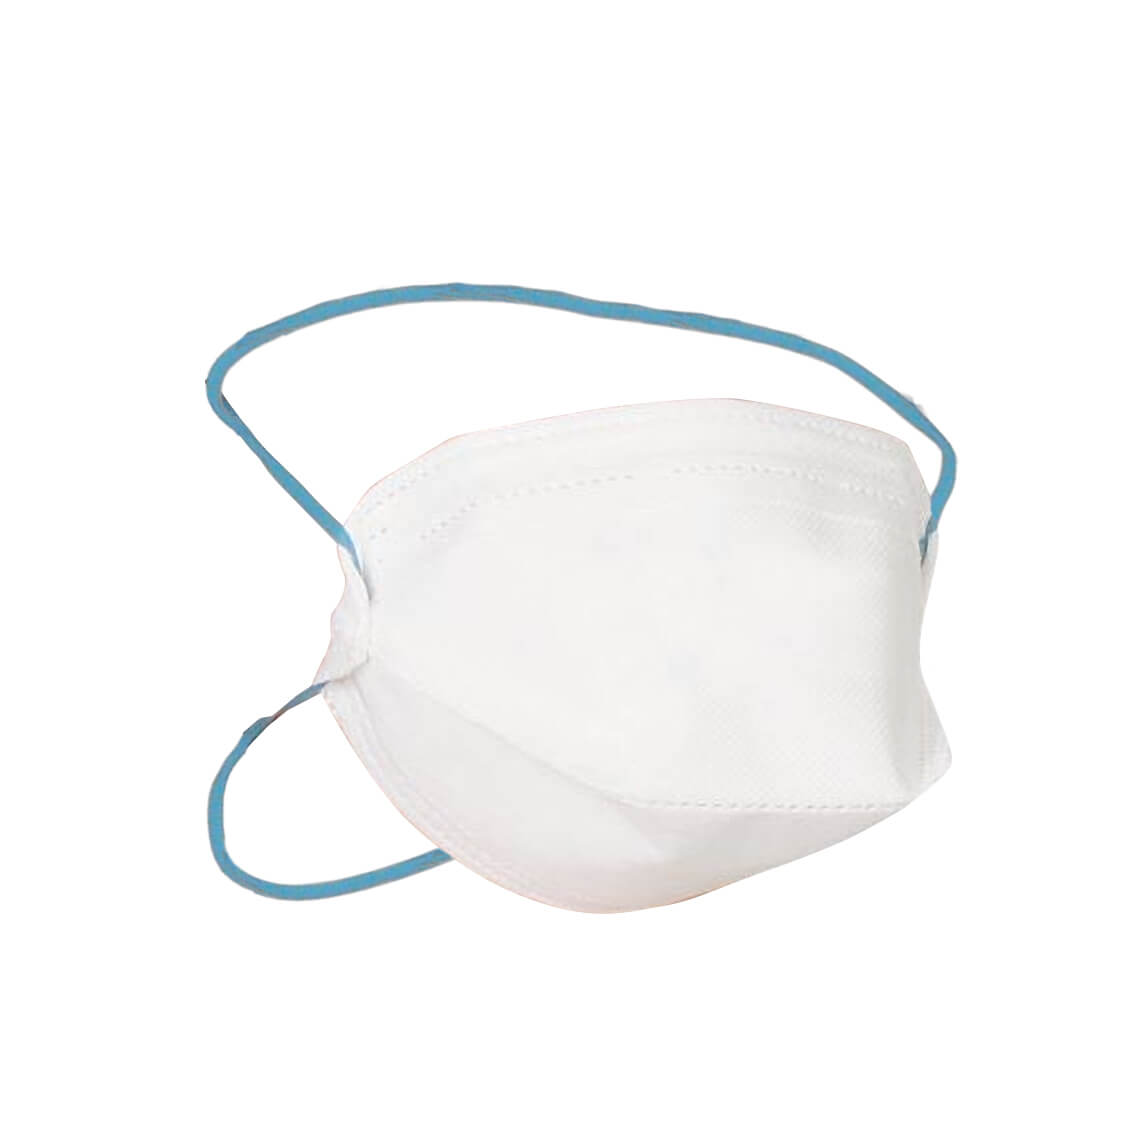 Ffp2 Breathing Mask Without Valve Protective Work Wear Clothing Practice Equipment Doccheck Shop Your Medical Supplies Online